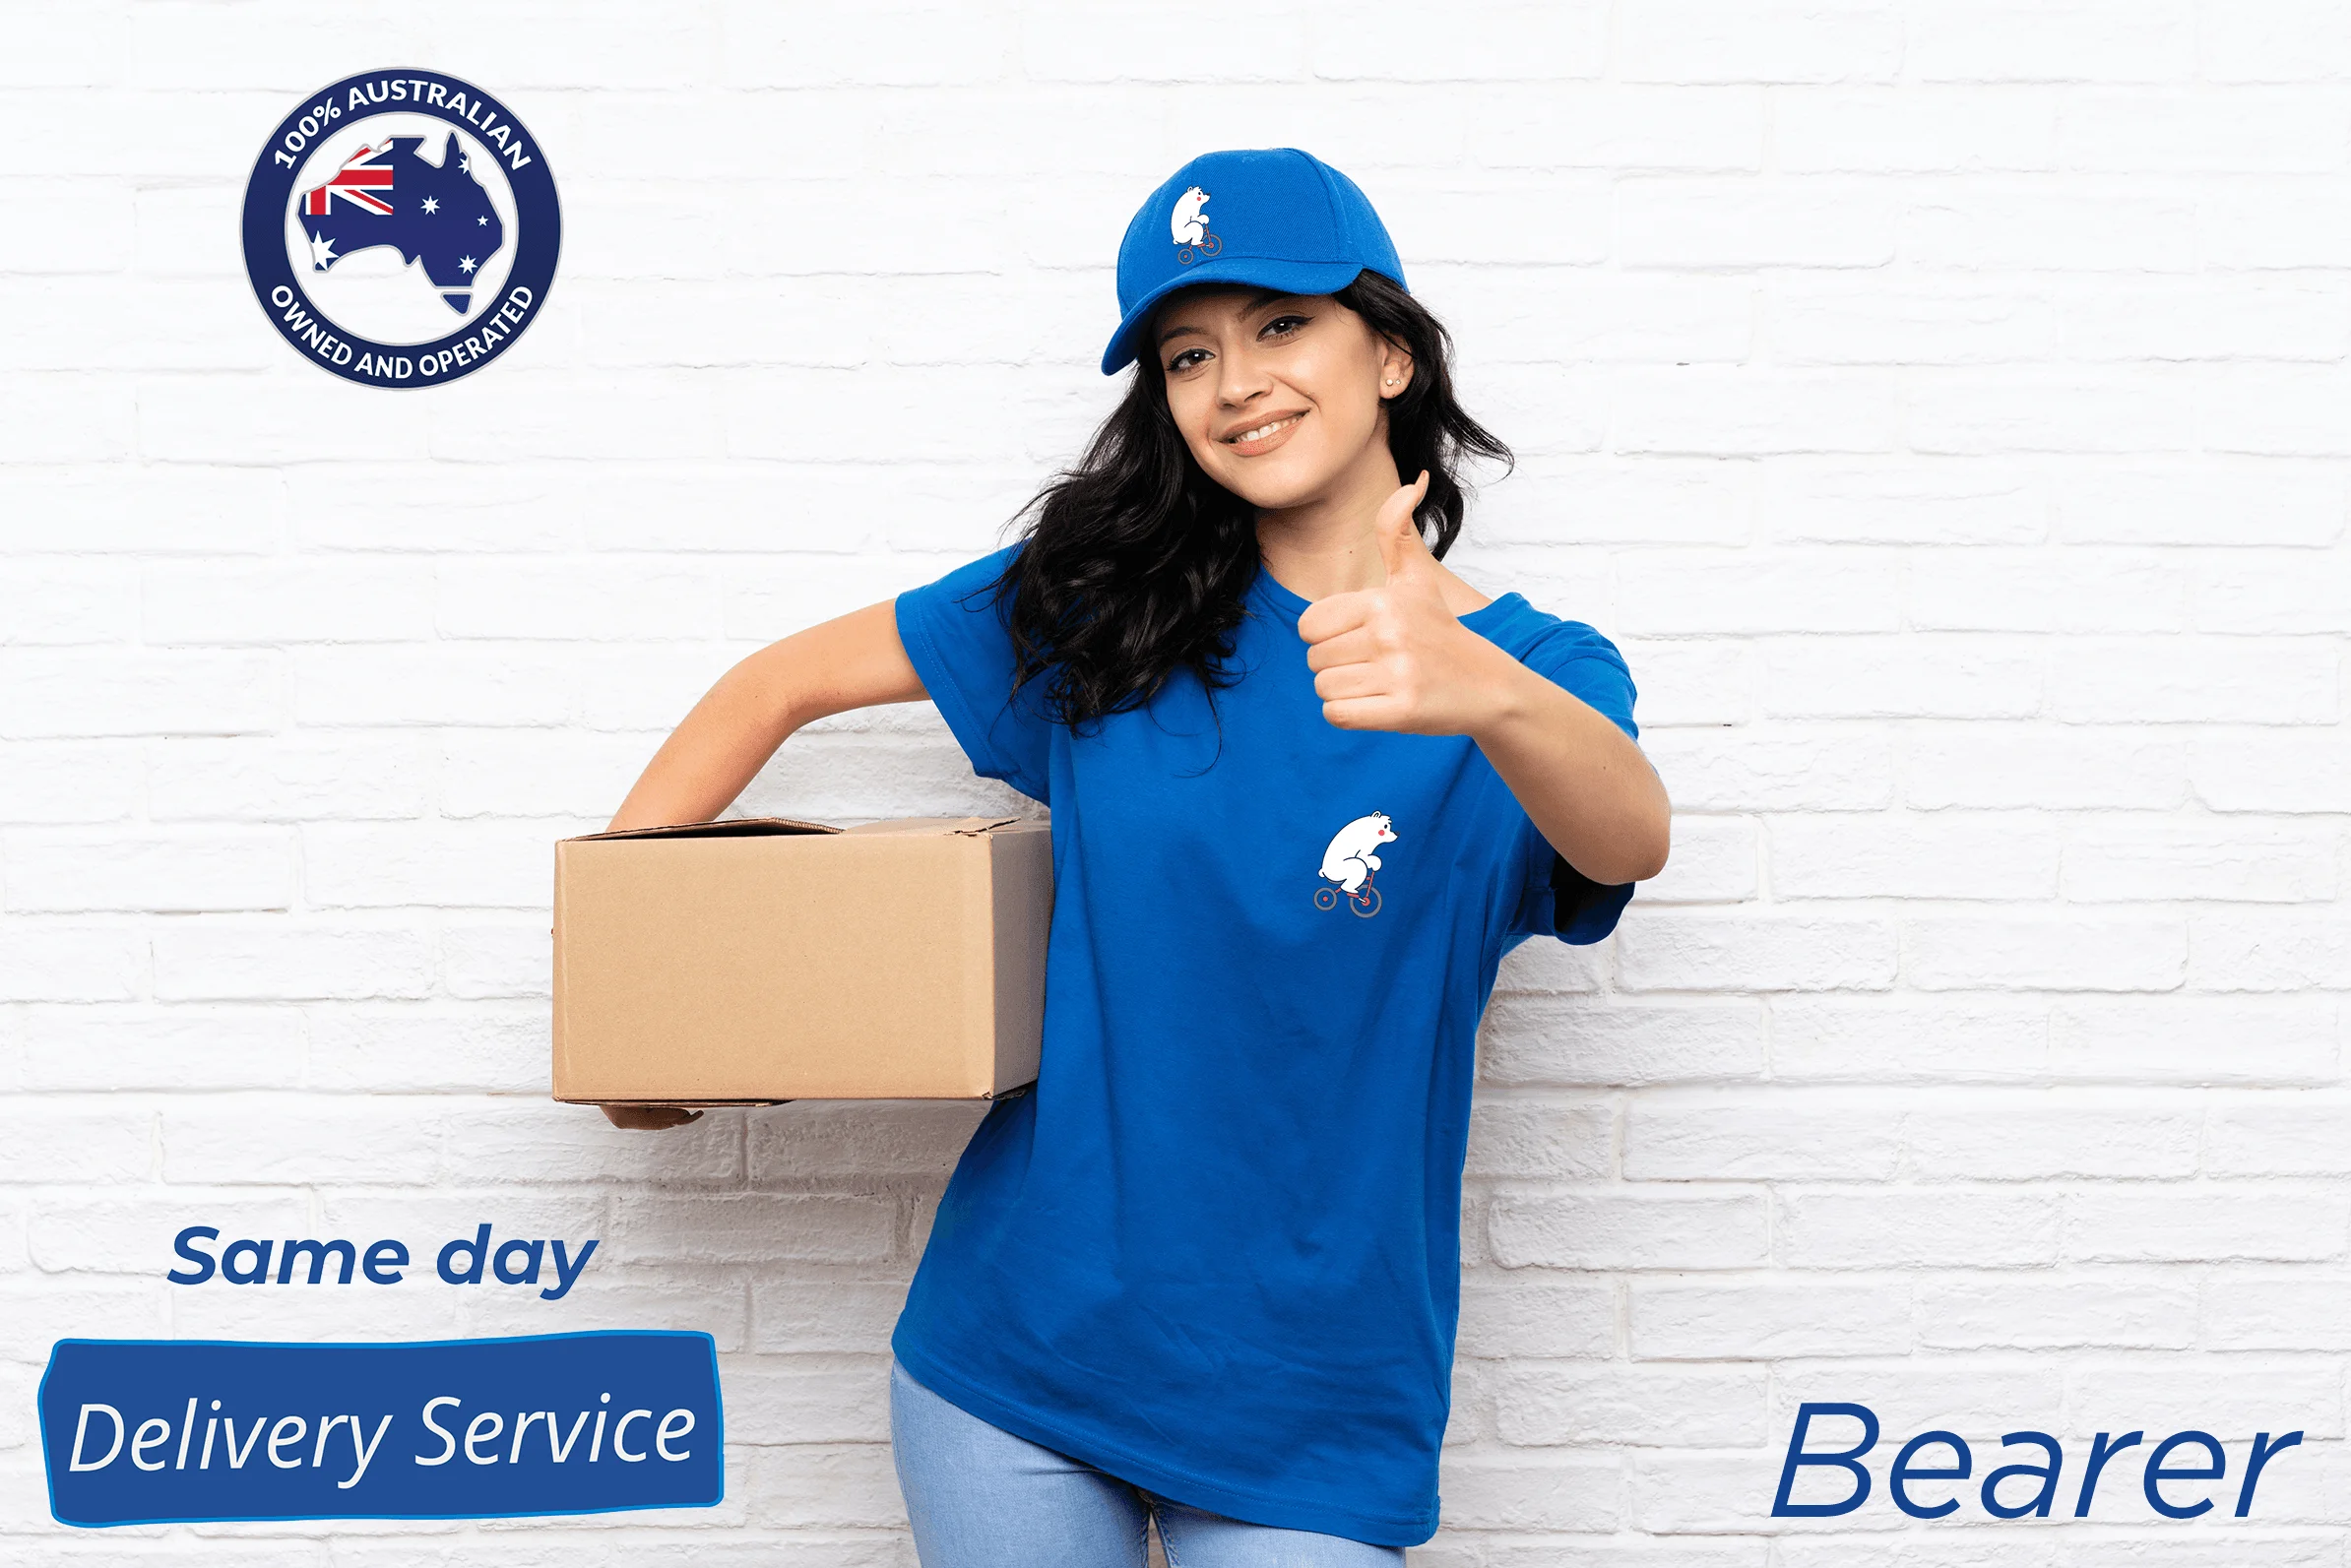 Bearer delivery services